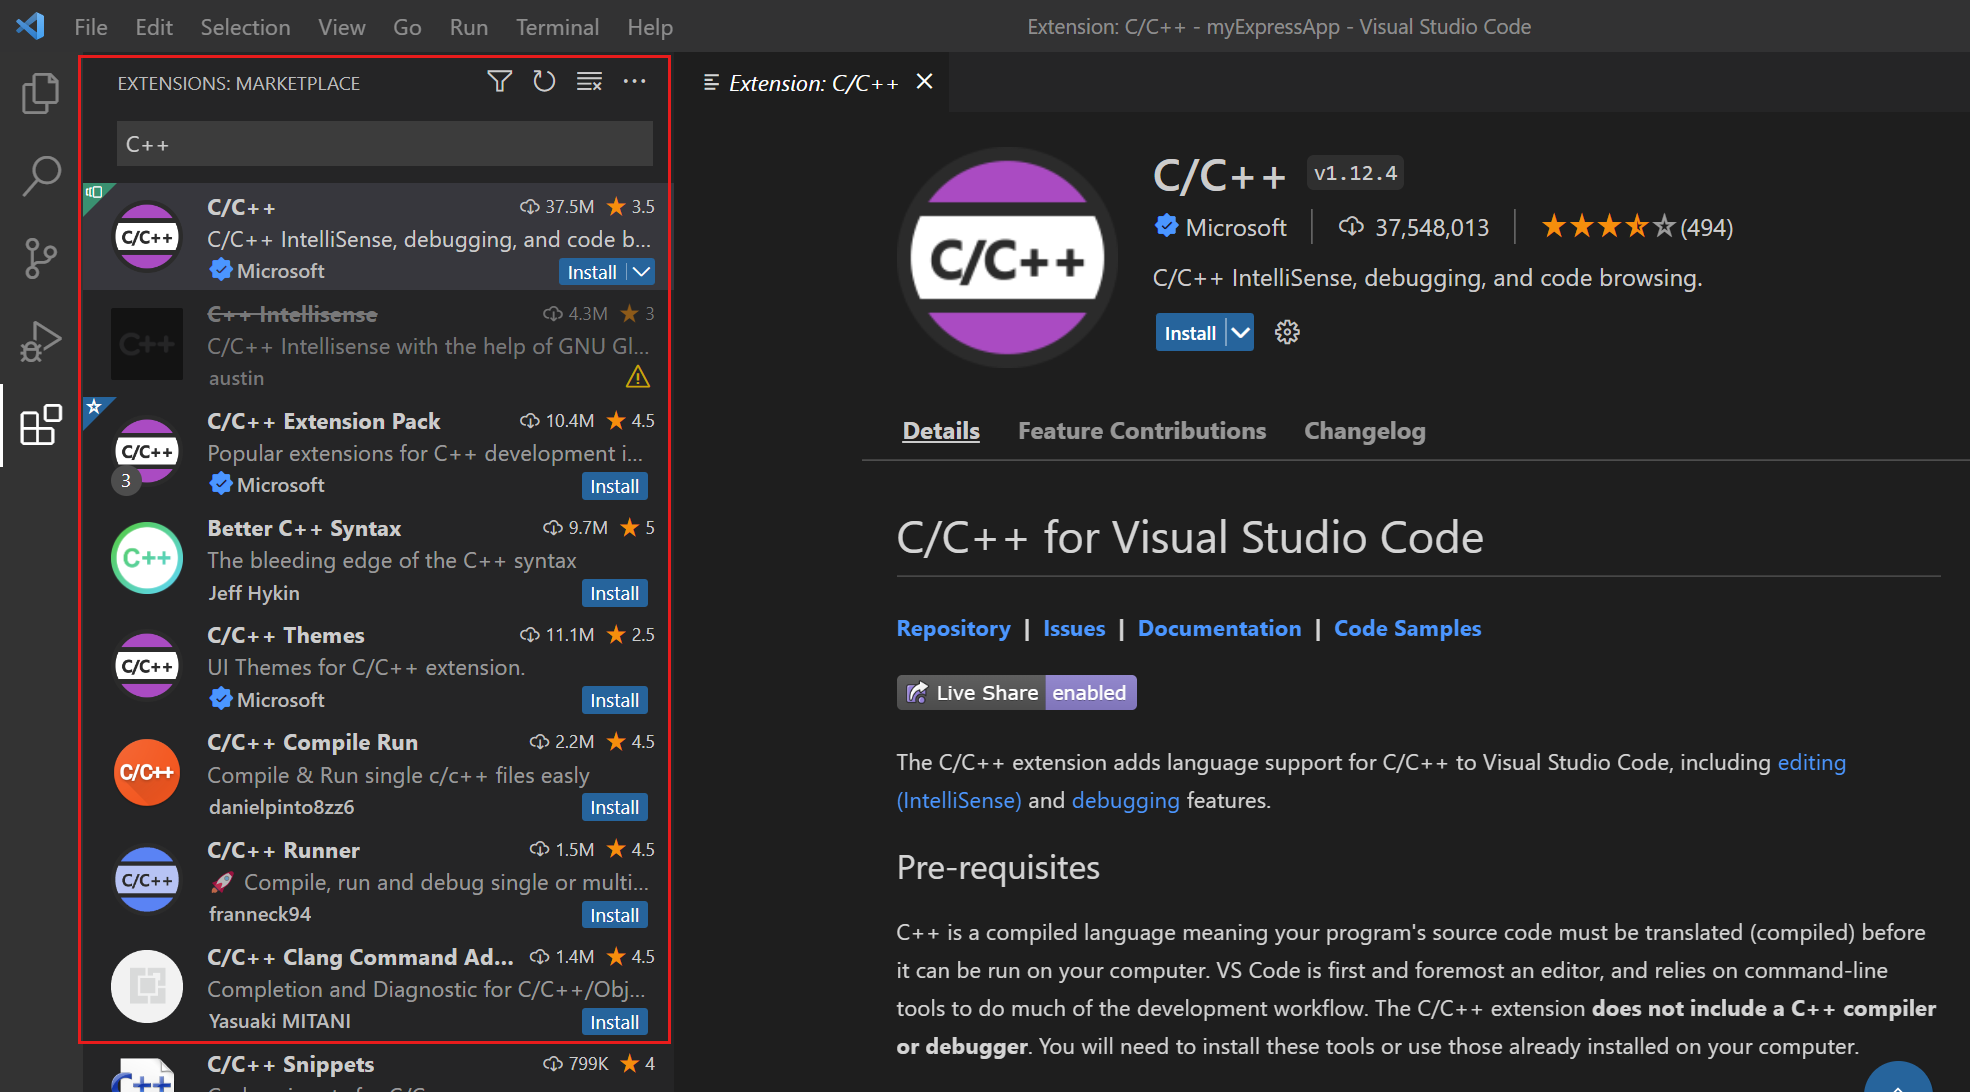 Screenshot of Visual Studio Code with the Extensions Marketplace view displayed.